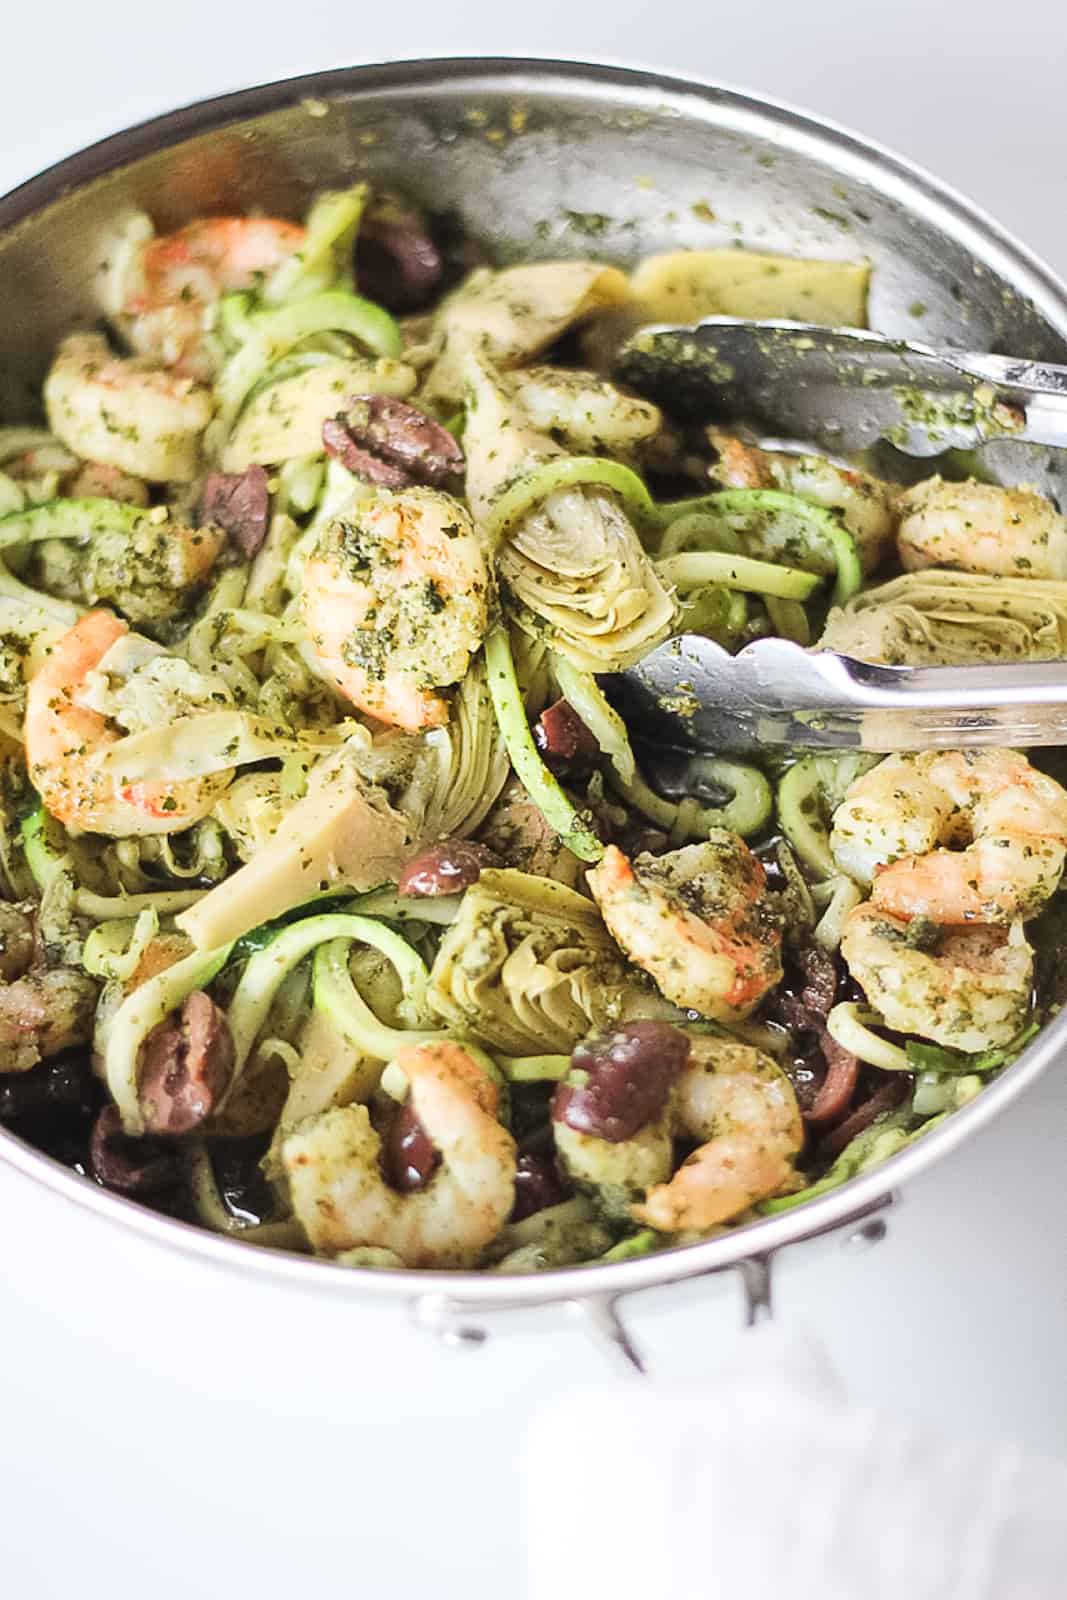 Stainless steel pan full of pesto zucchini noodles, shrimp, artichoke hearts and olives for Pesto Zucchini Noodles with Shrimp recipe.